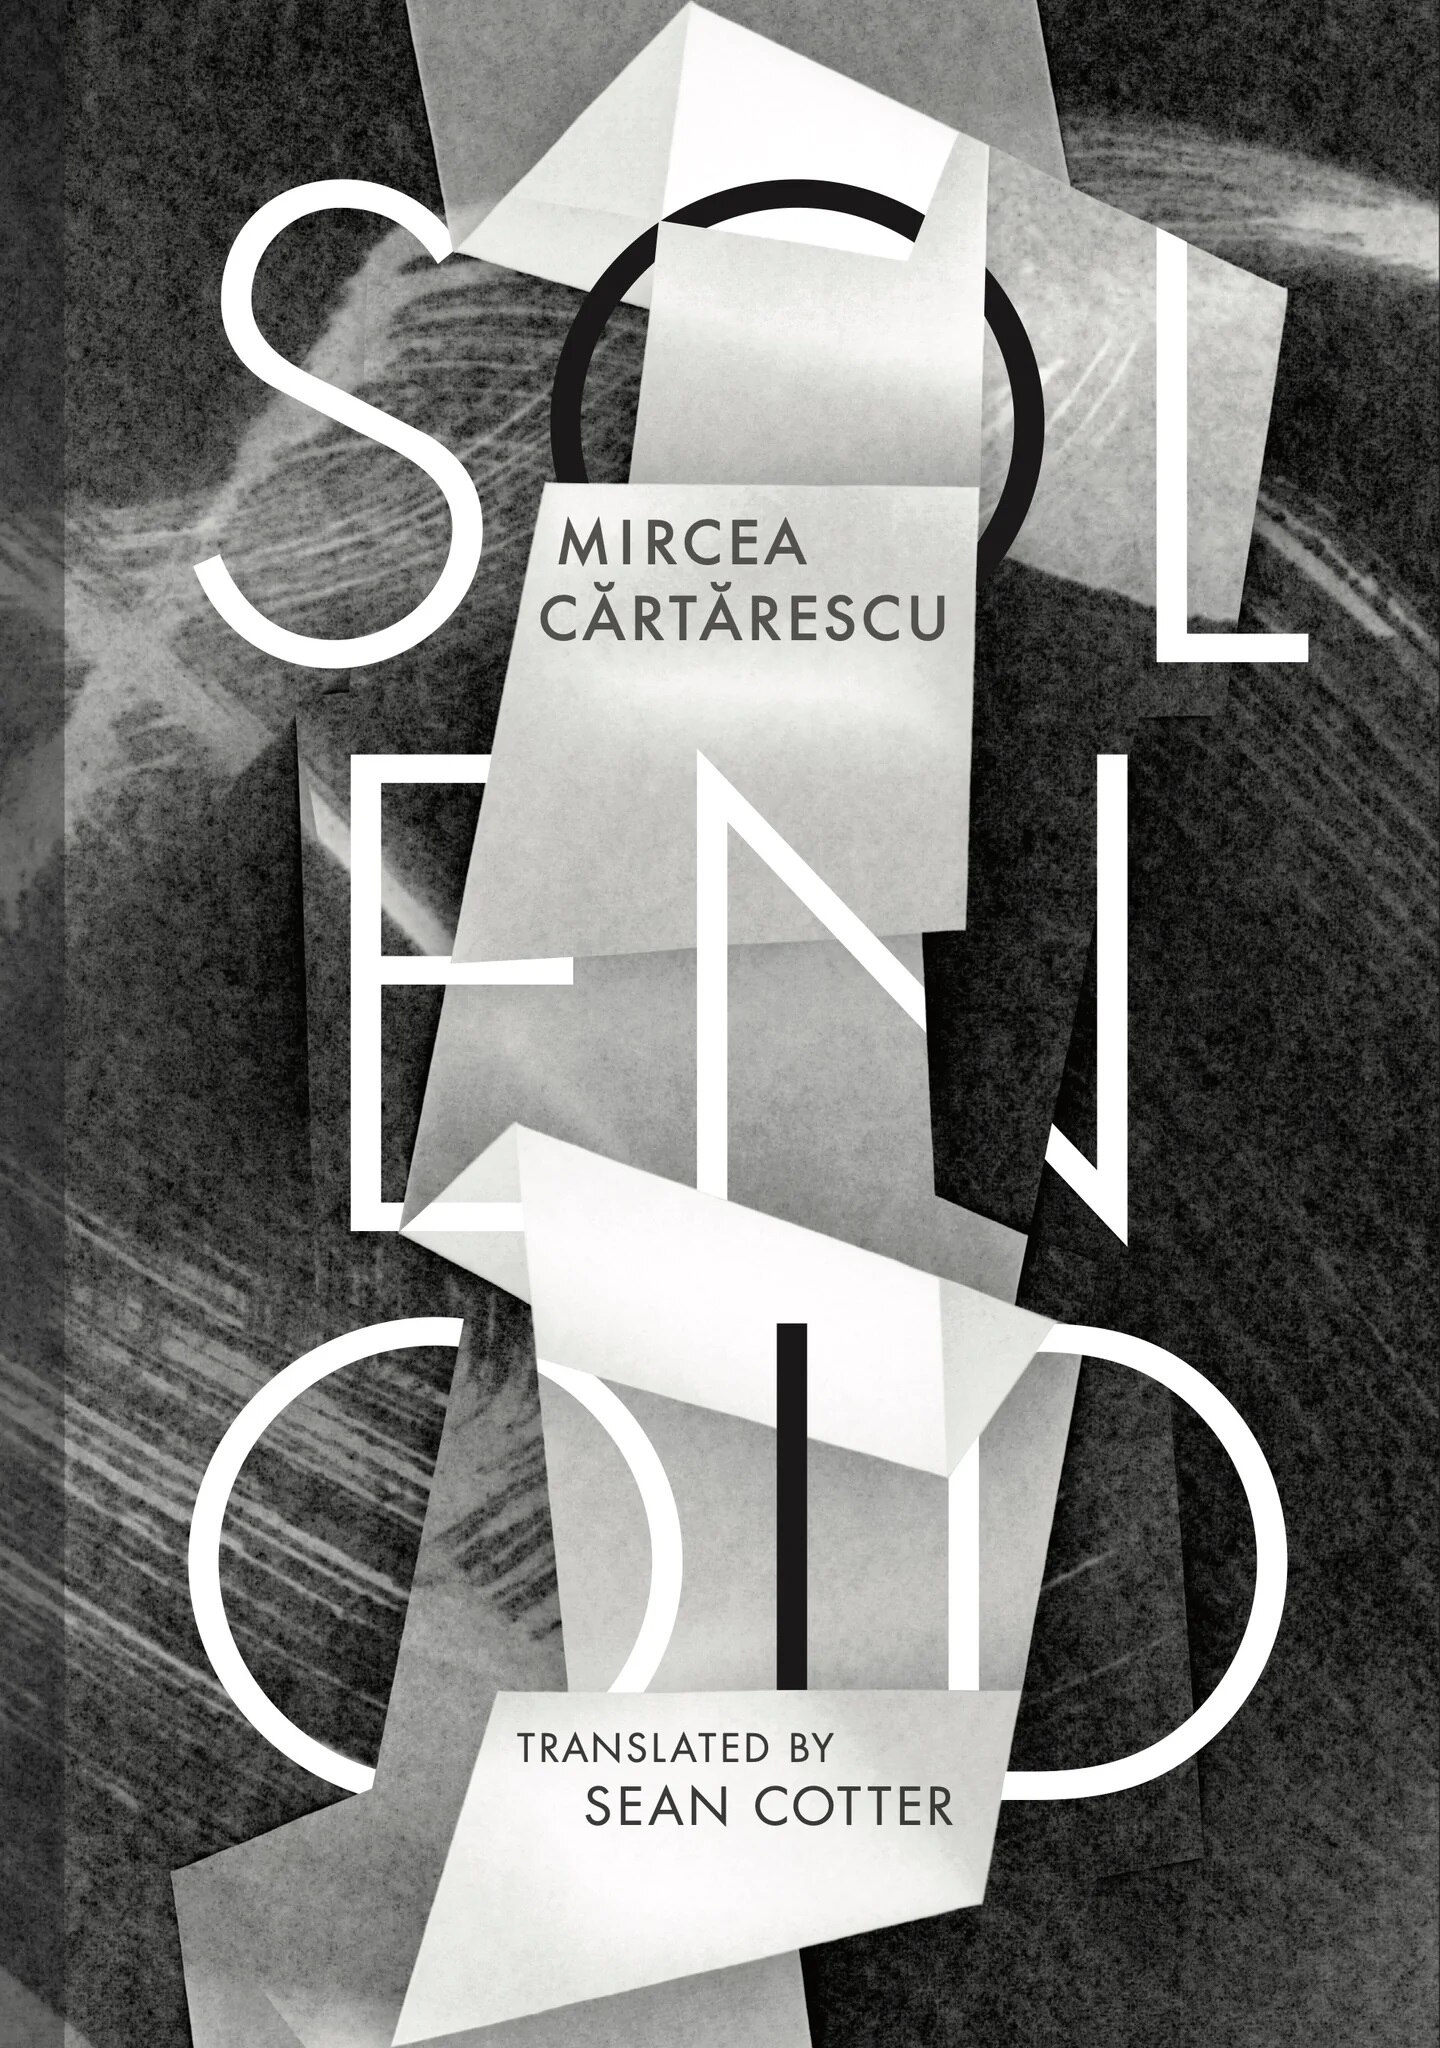 A book cover featuring a black and white abstract illustration